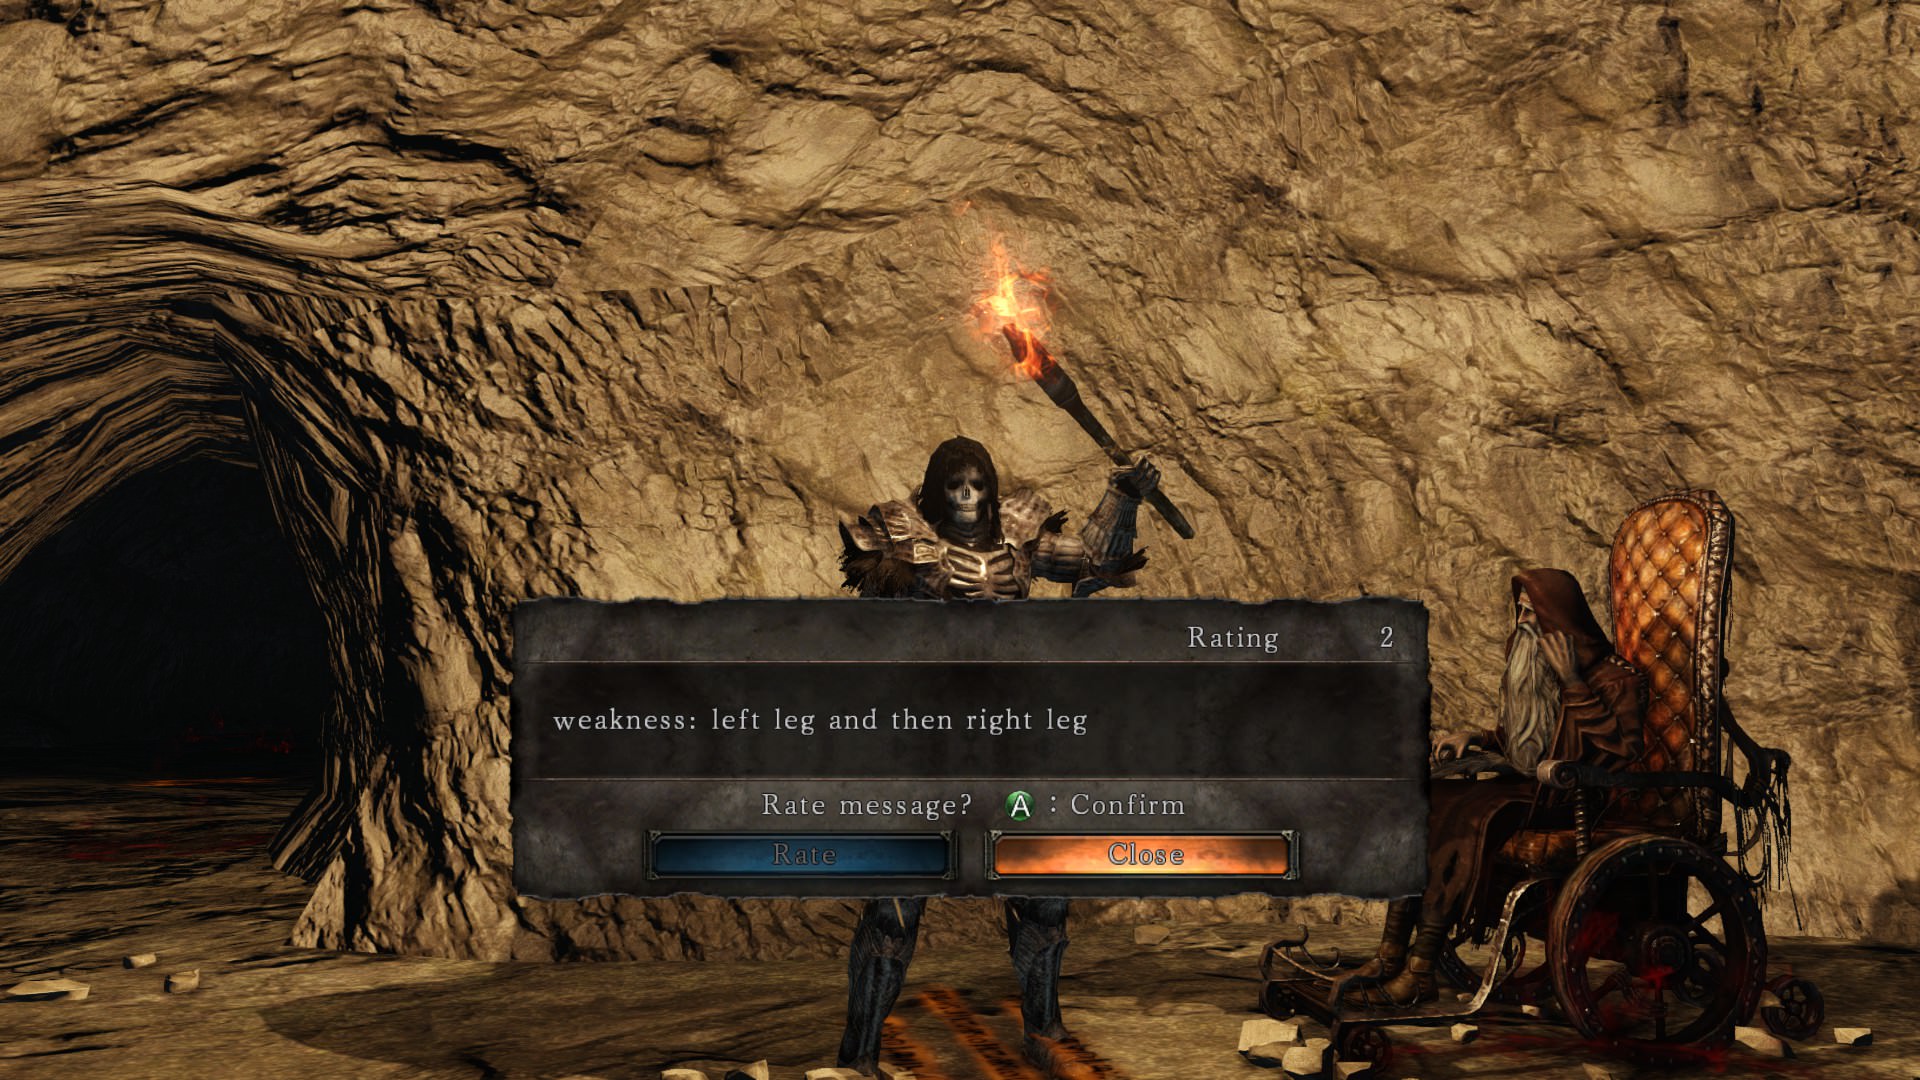 funny dark souls messages - Rating 2 weakness left leg and then right leg Rate Message? A Confirnt